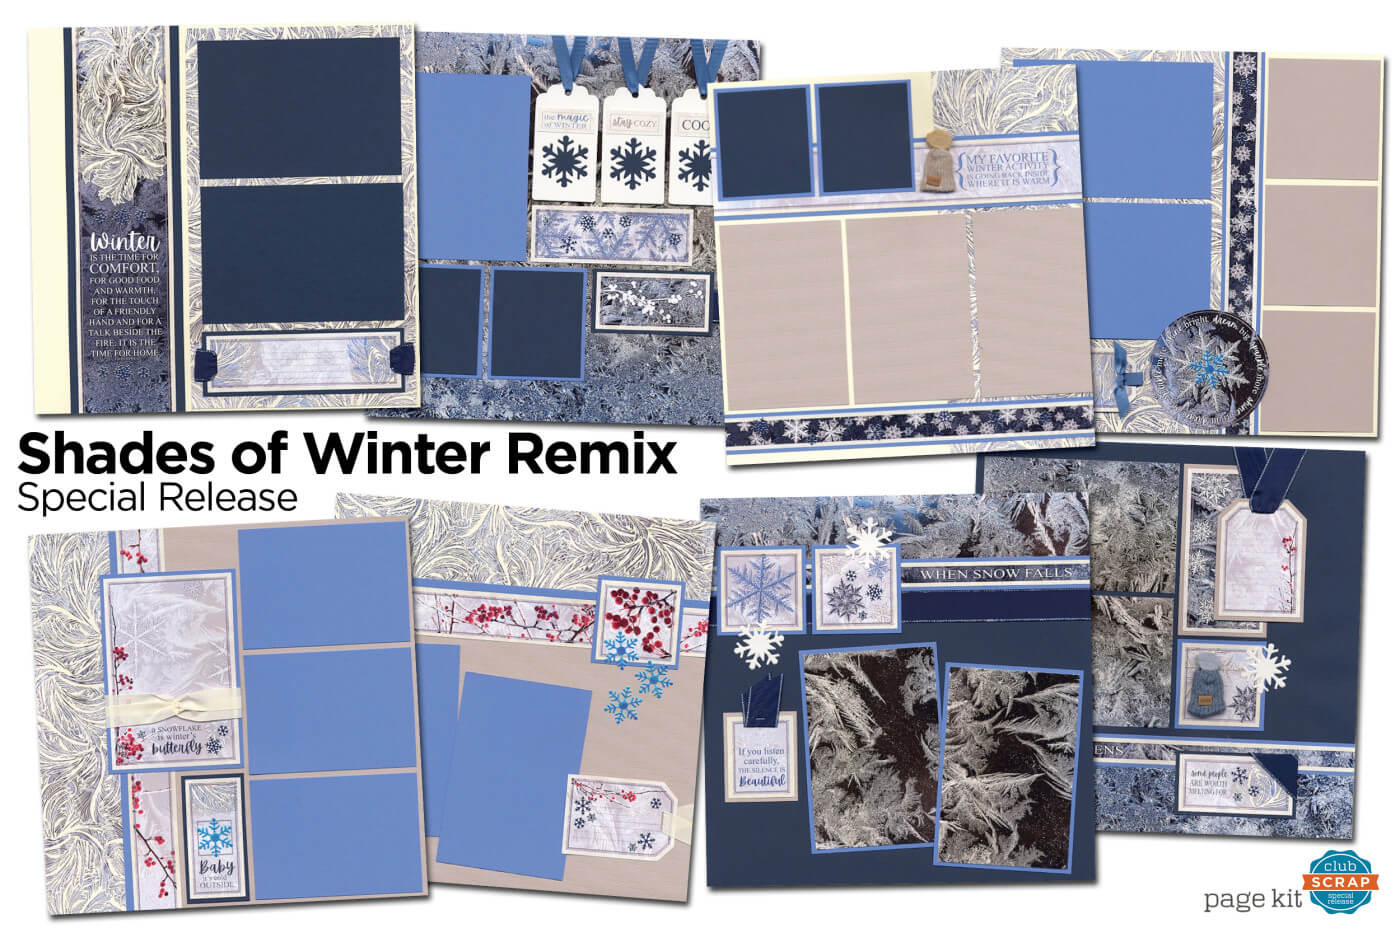 Shades of Winter Remix Page kit